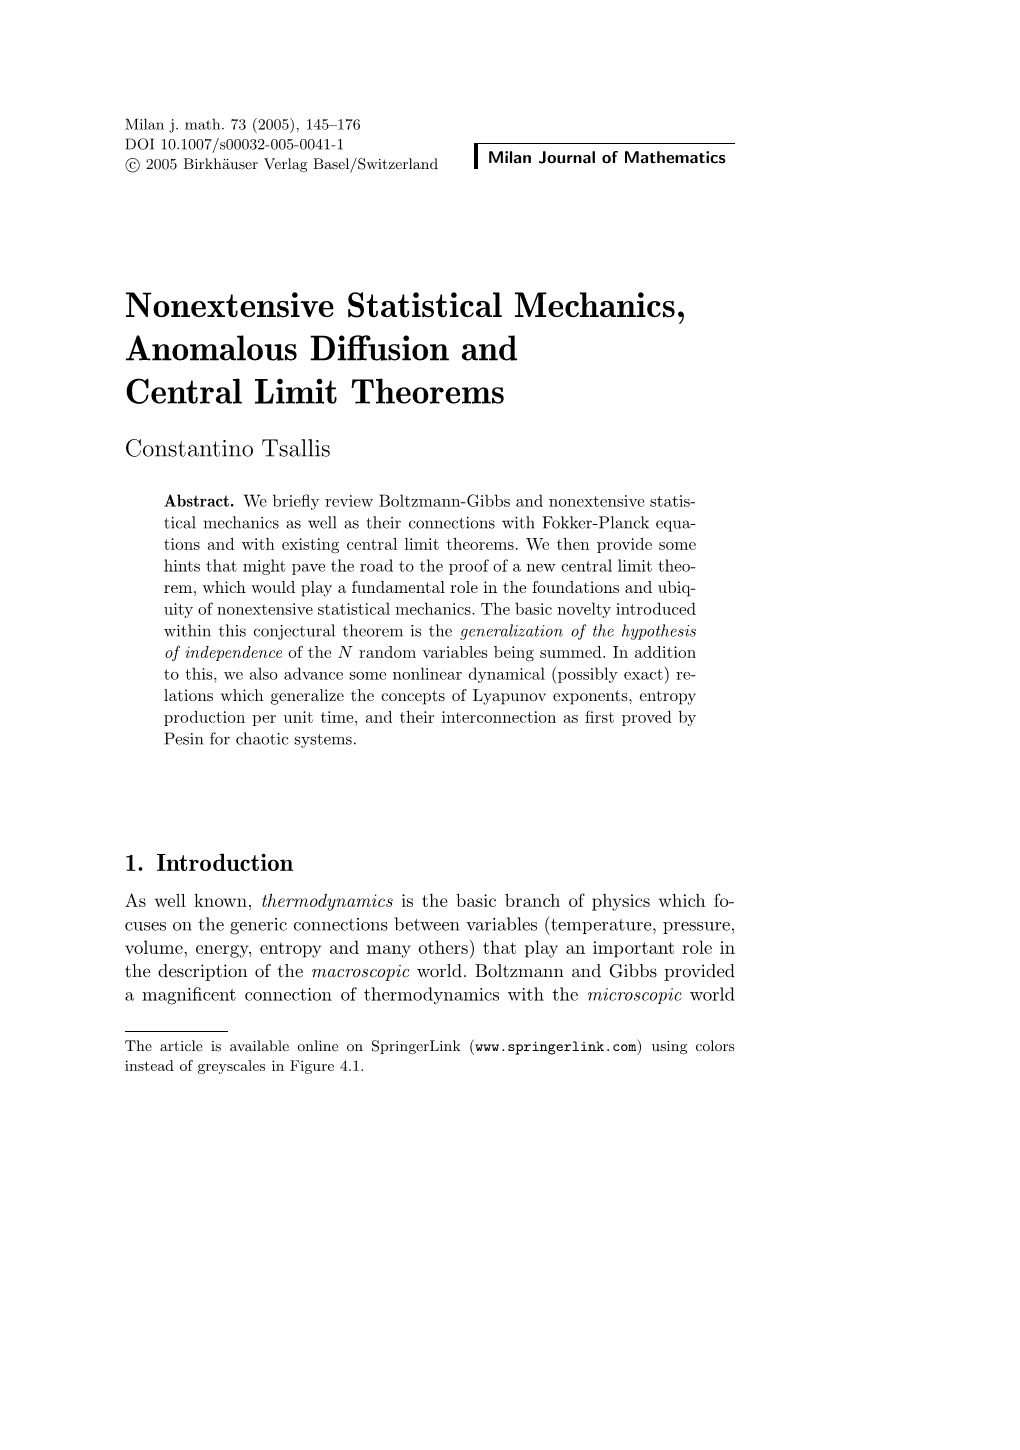 Nonextensive Statistical Mechanics, Anomalous Diffusion and Central